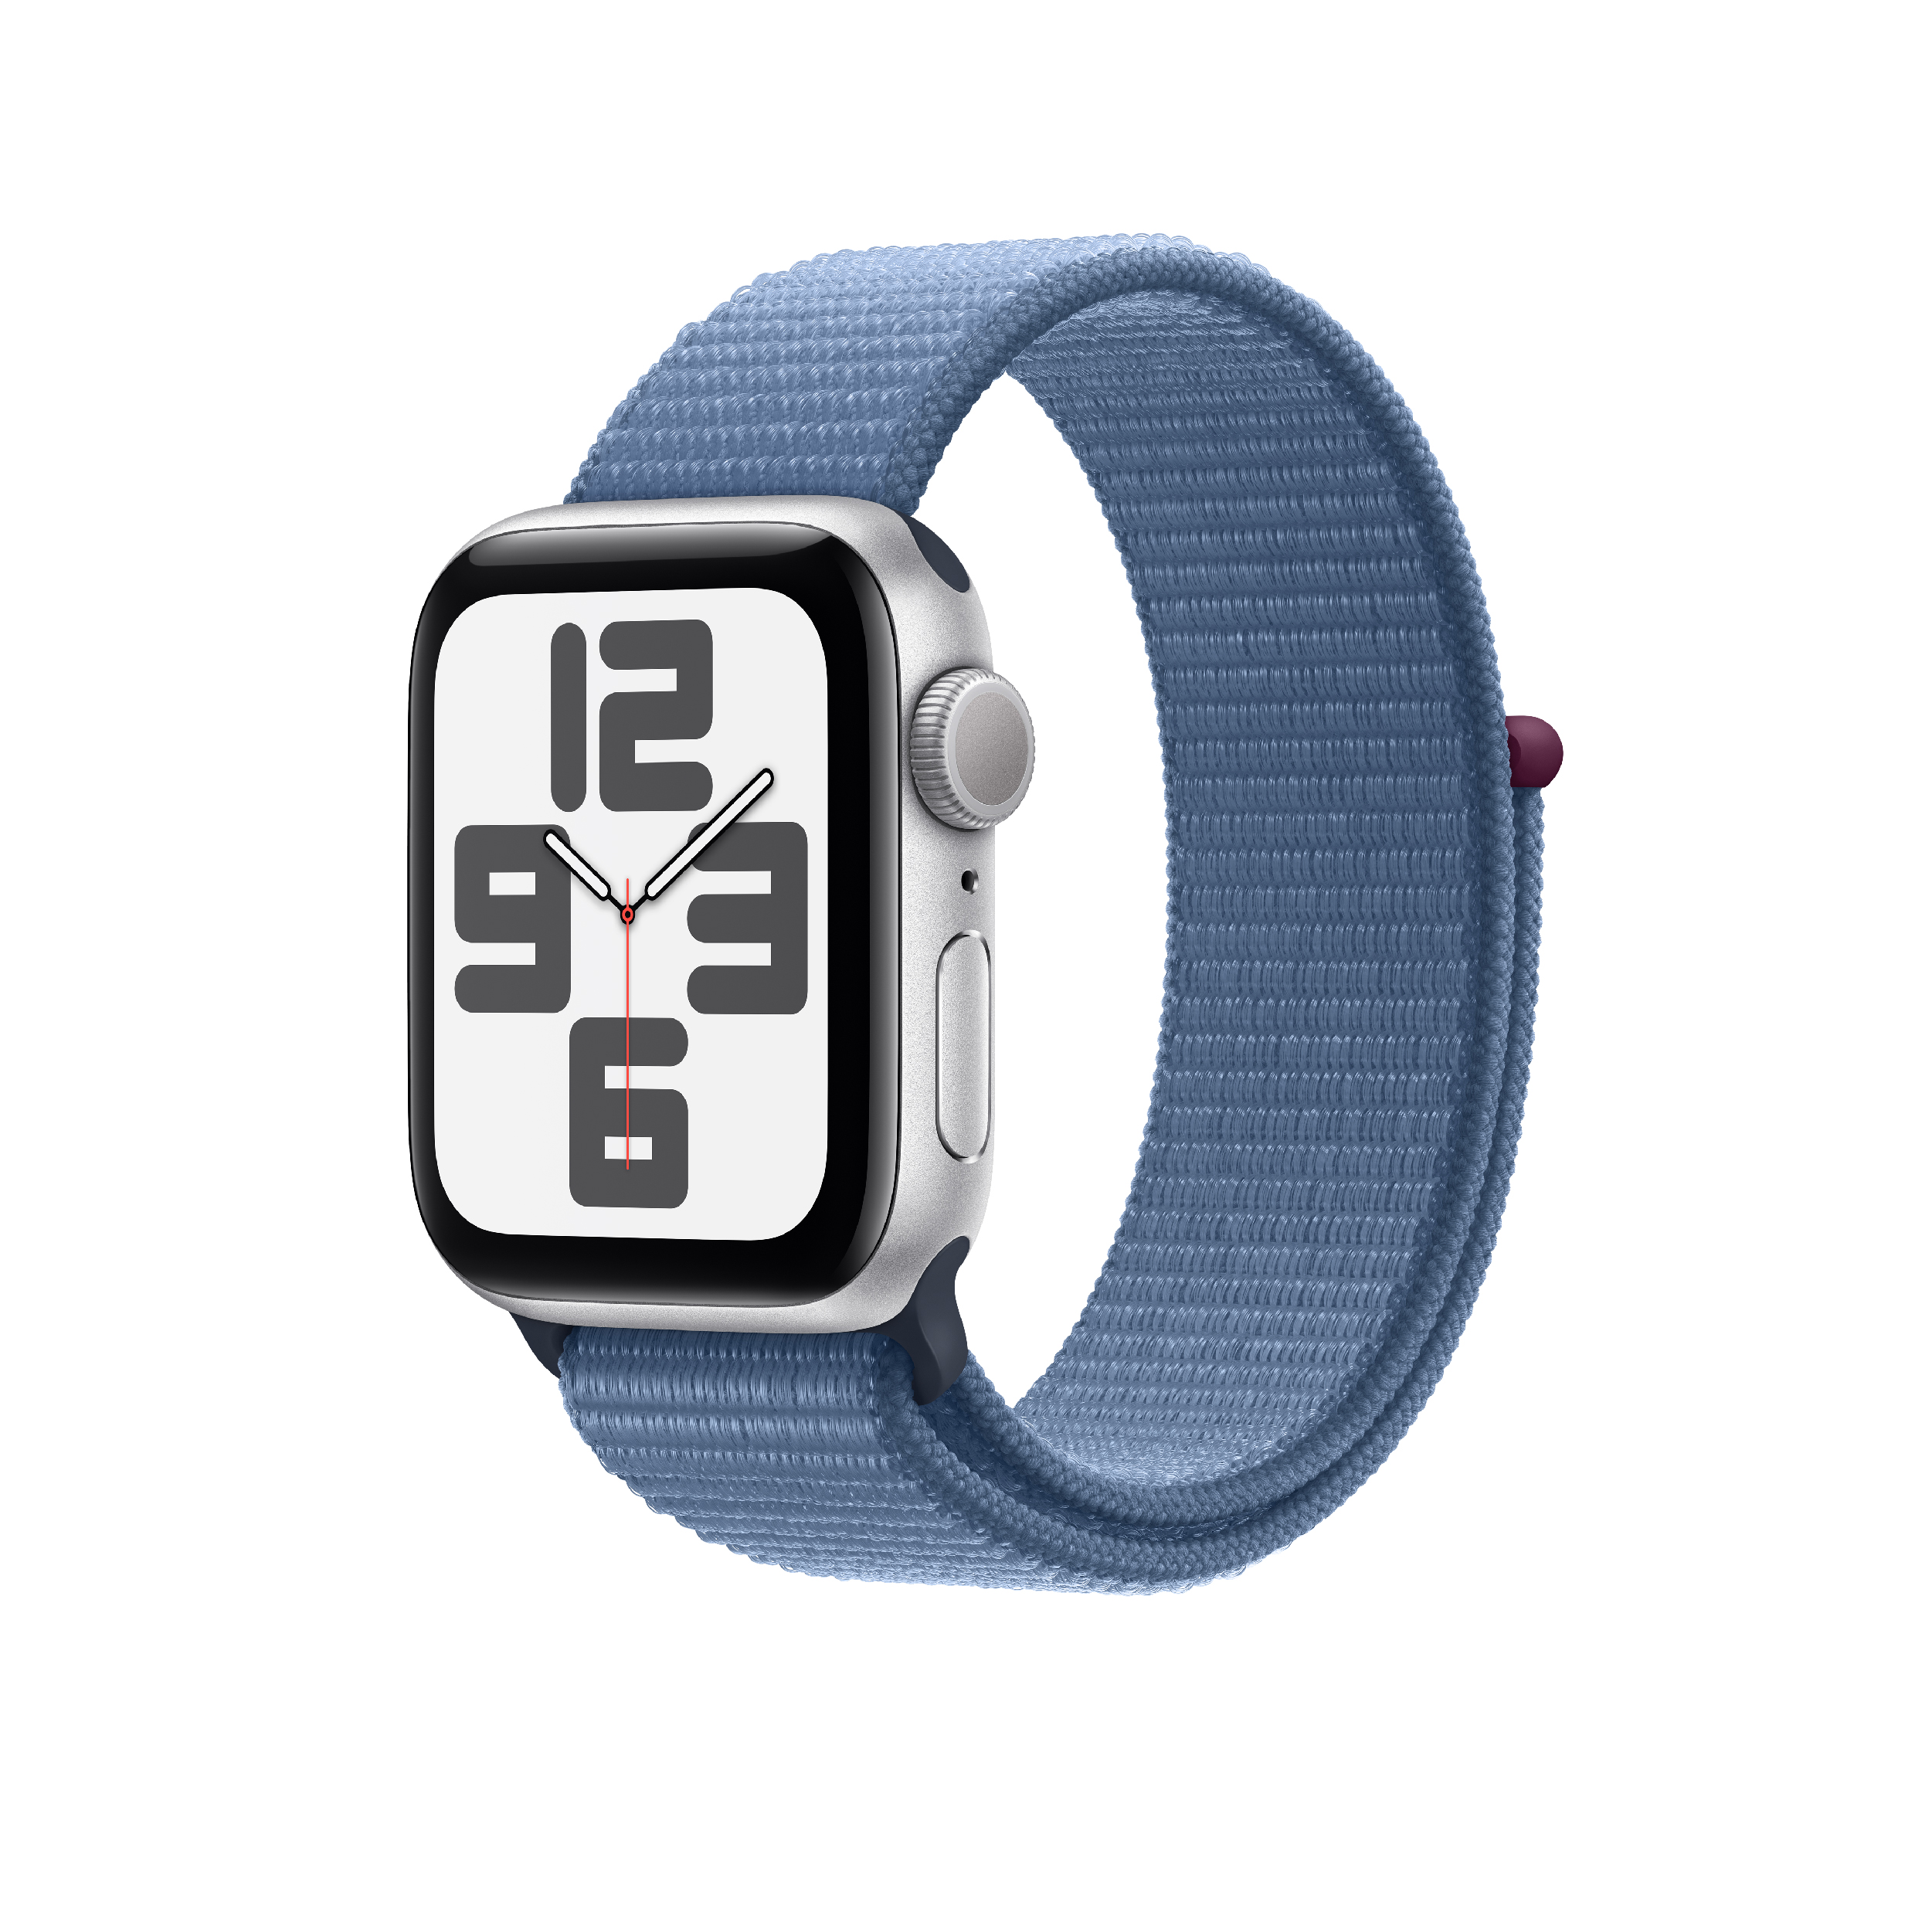 APPLE Smartwatch SE GPS Cellular 44 mm, Silver Aluminium with Storm Blue Sport Loop One Size | Apple| Image 2